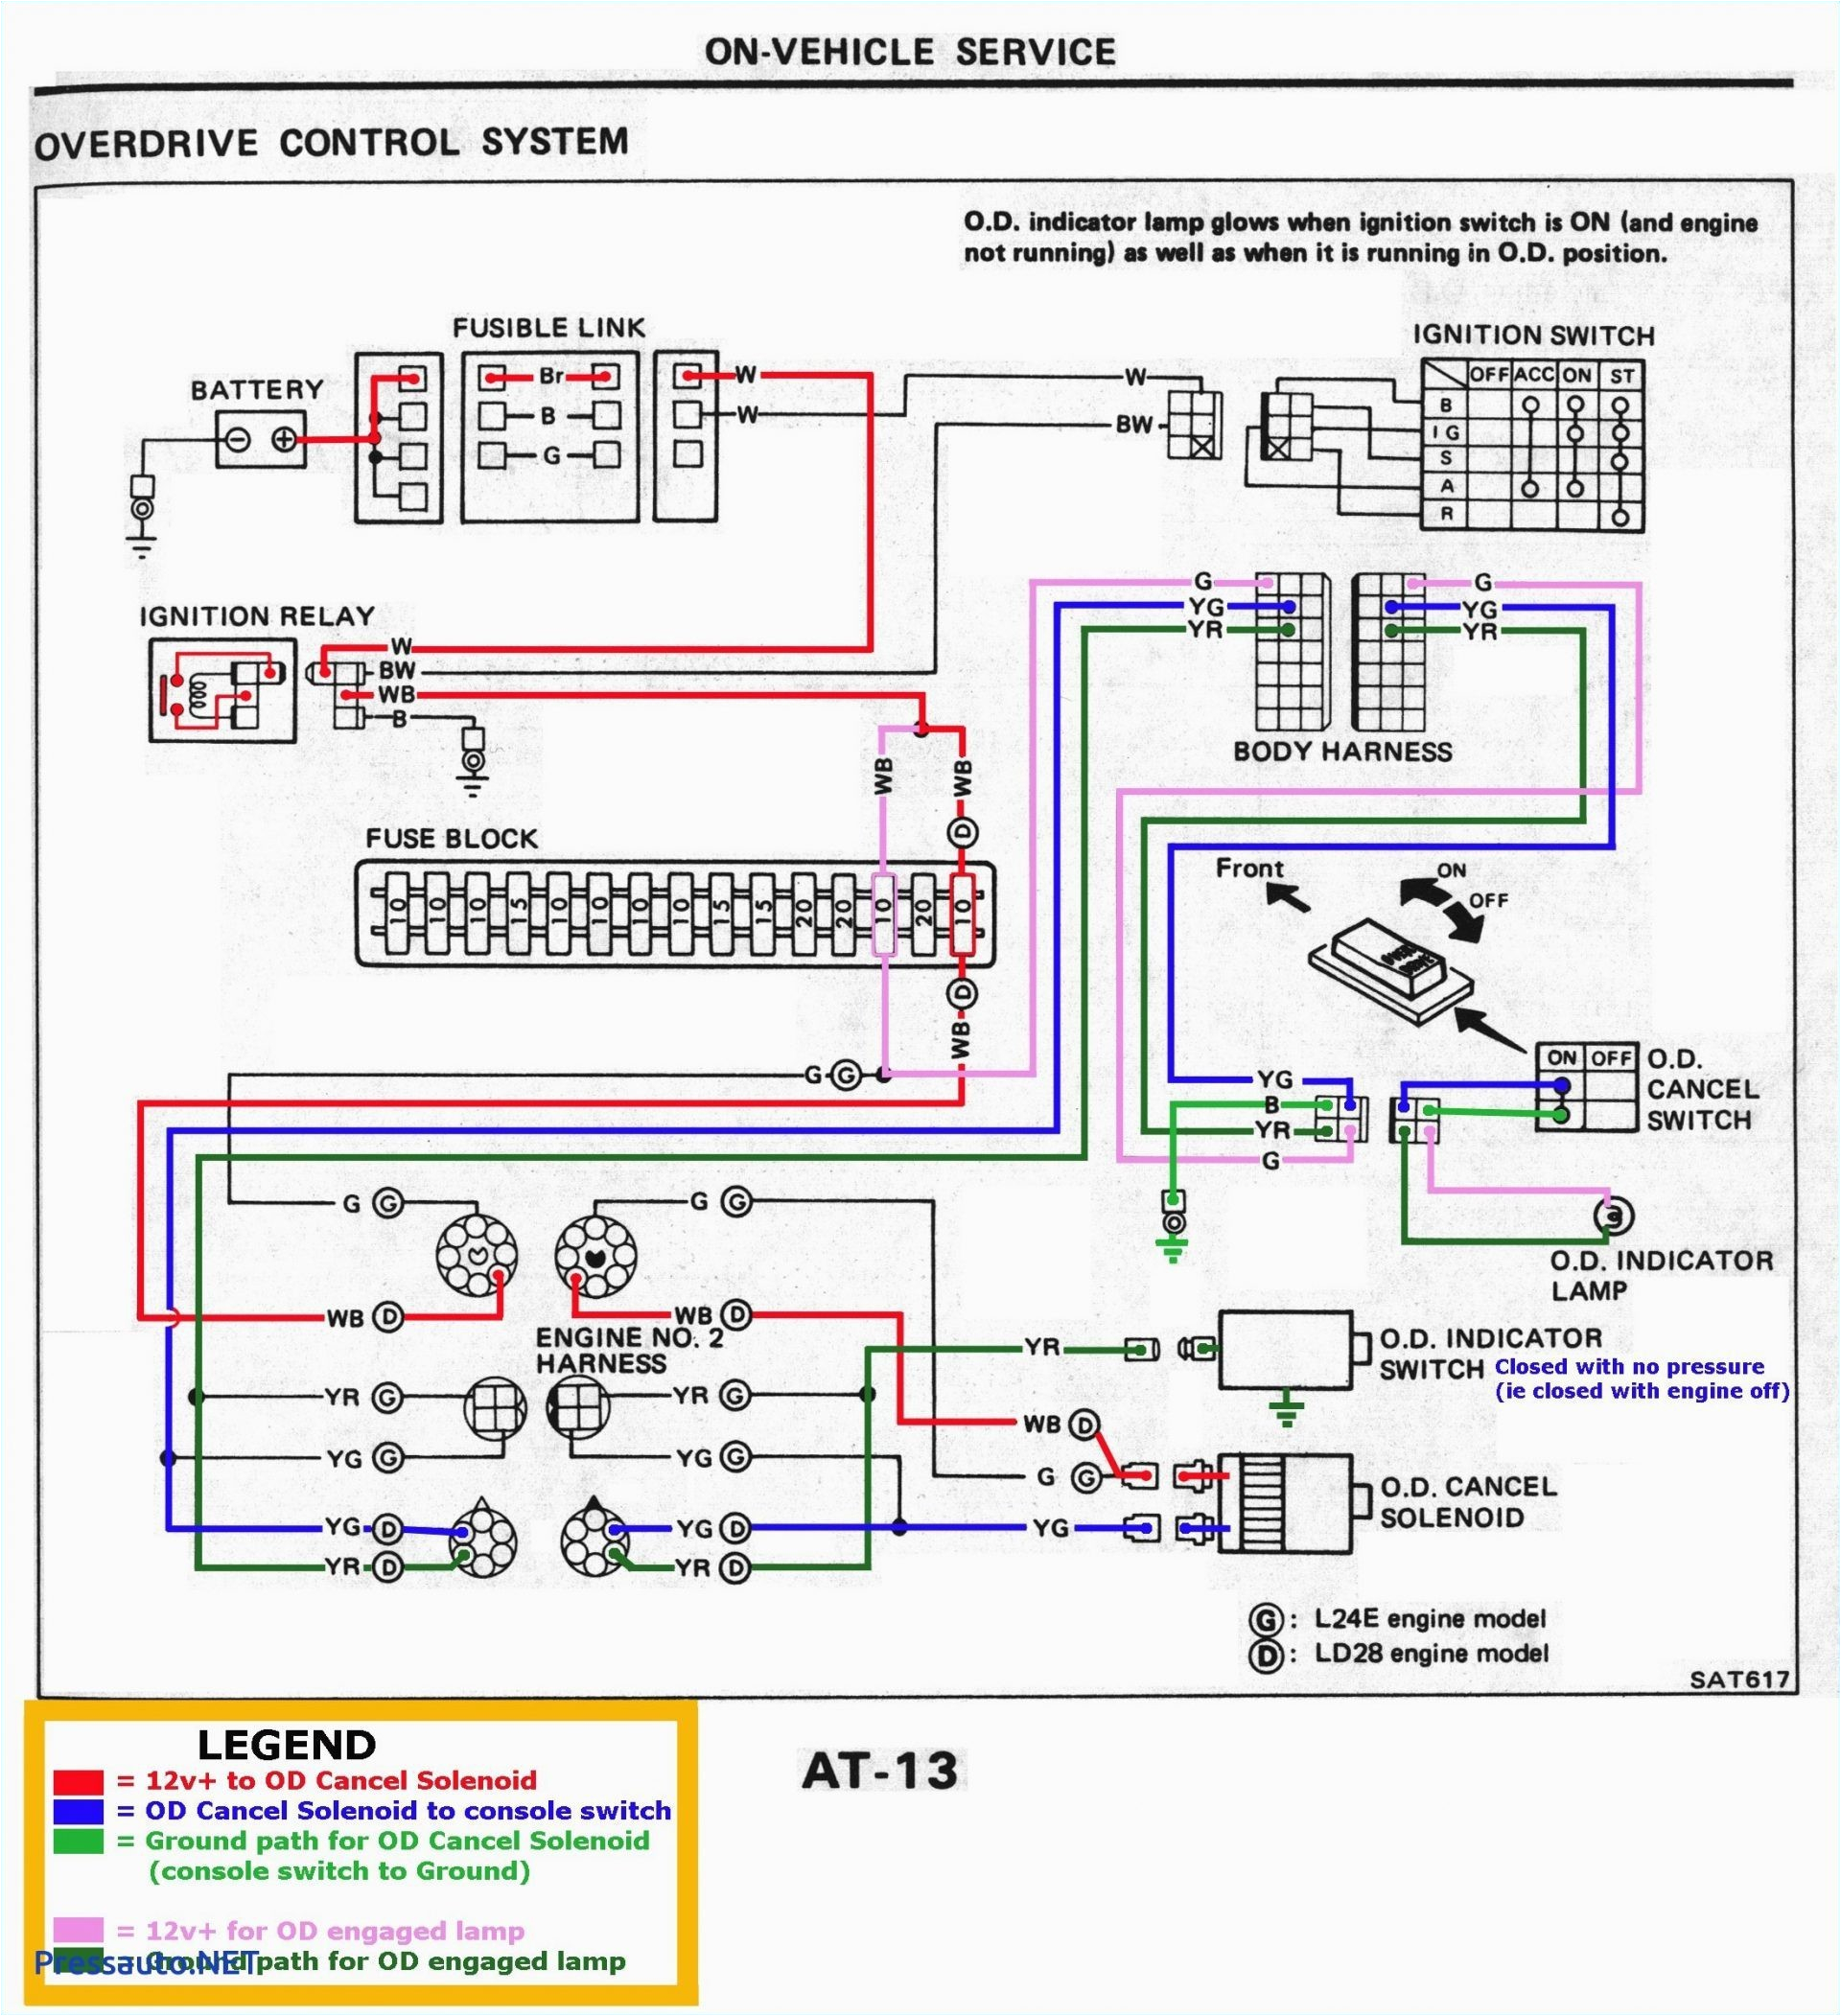 simple wiring diagram for house unique simple wiring diagram for house inspirationa house electrical wiring jpg